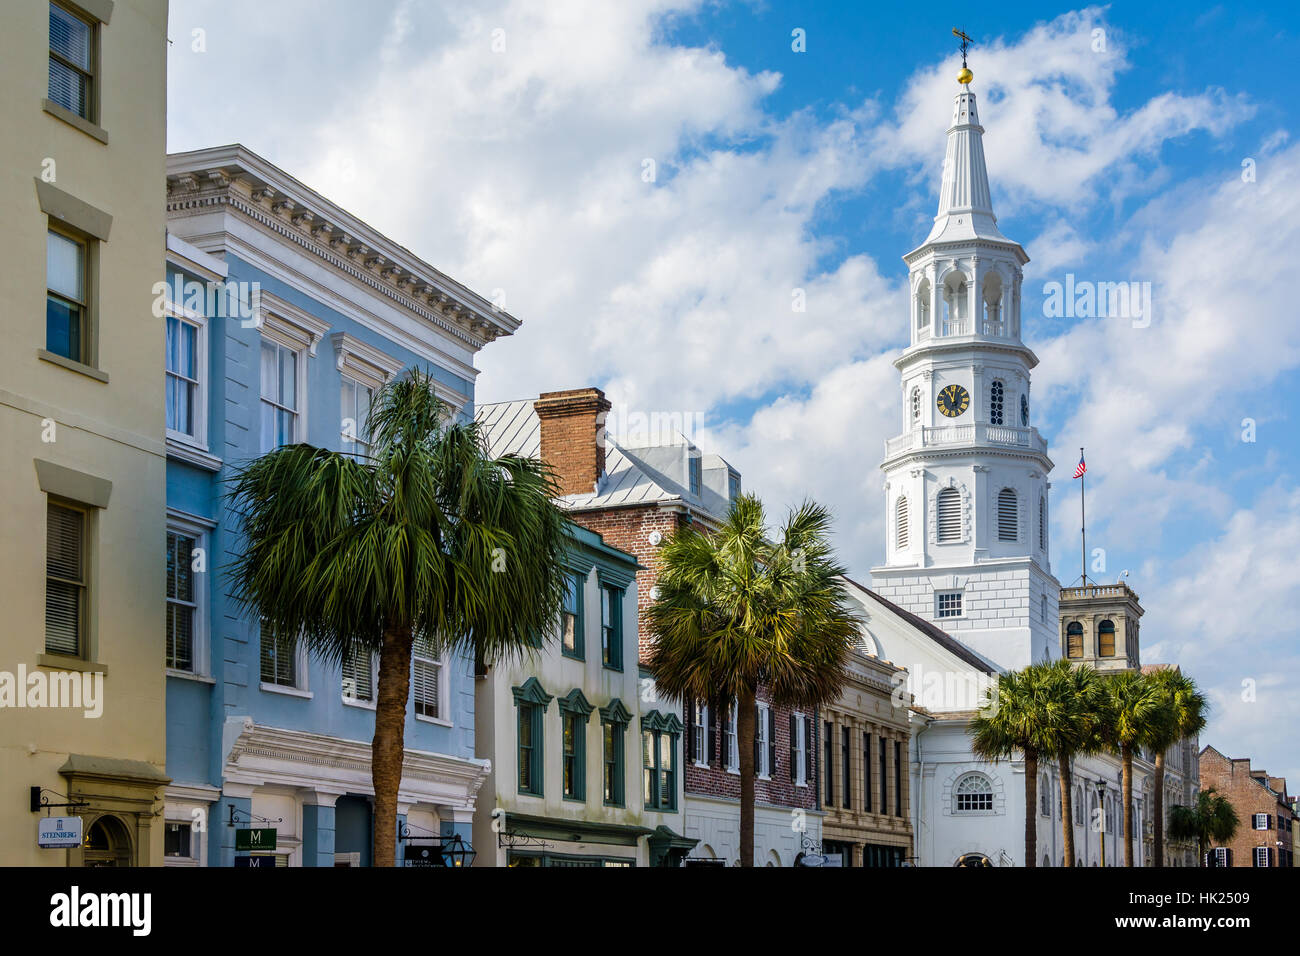 Buildings and palm trees along Broad Street, in Charleston, South Carolina. Stock Photo